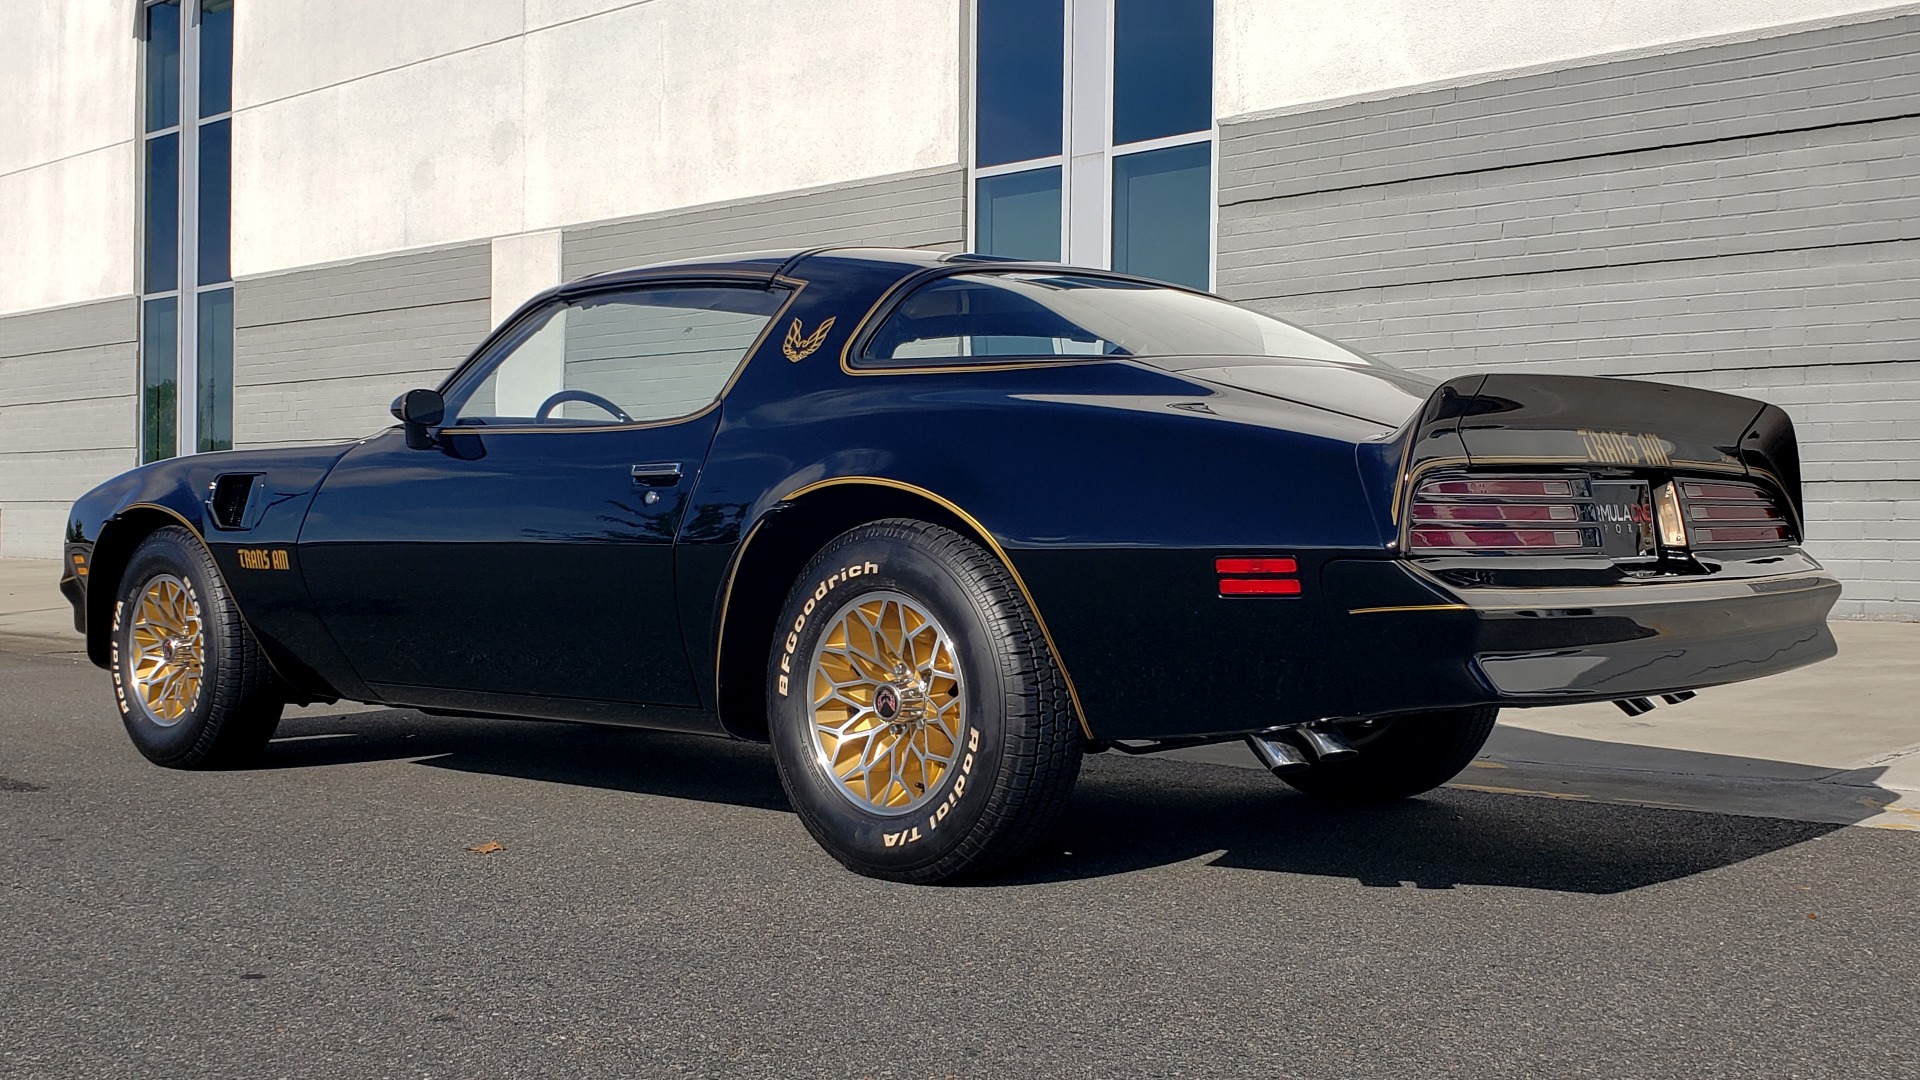 Used 1977 Pontiac TRANS AM Y82 SPECIAL EDITION BANDIT / 6.6L / 4-SPEED MANUAL / LOW MILES for sale Sold at Formula Imports in Charlotte NC 28227 9